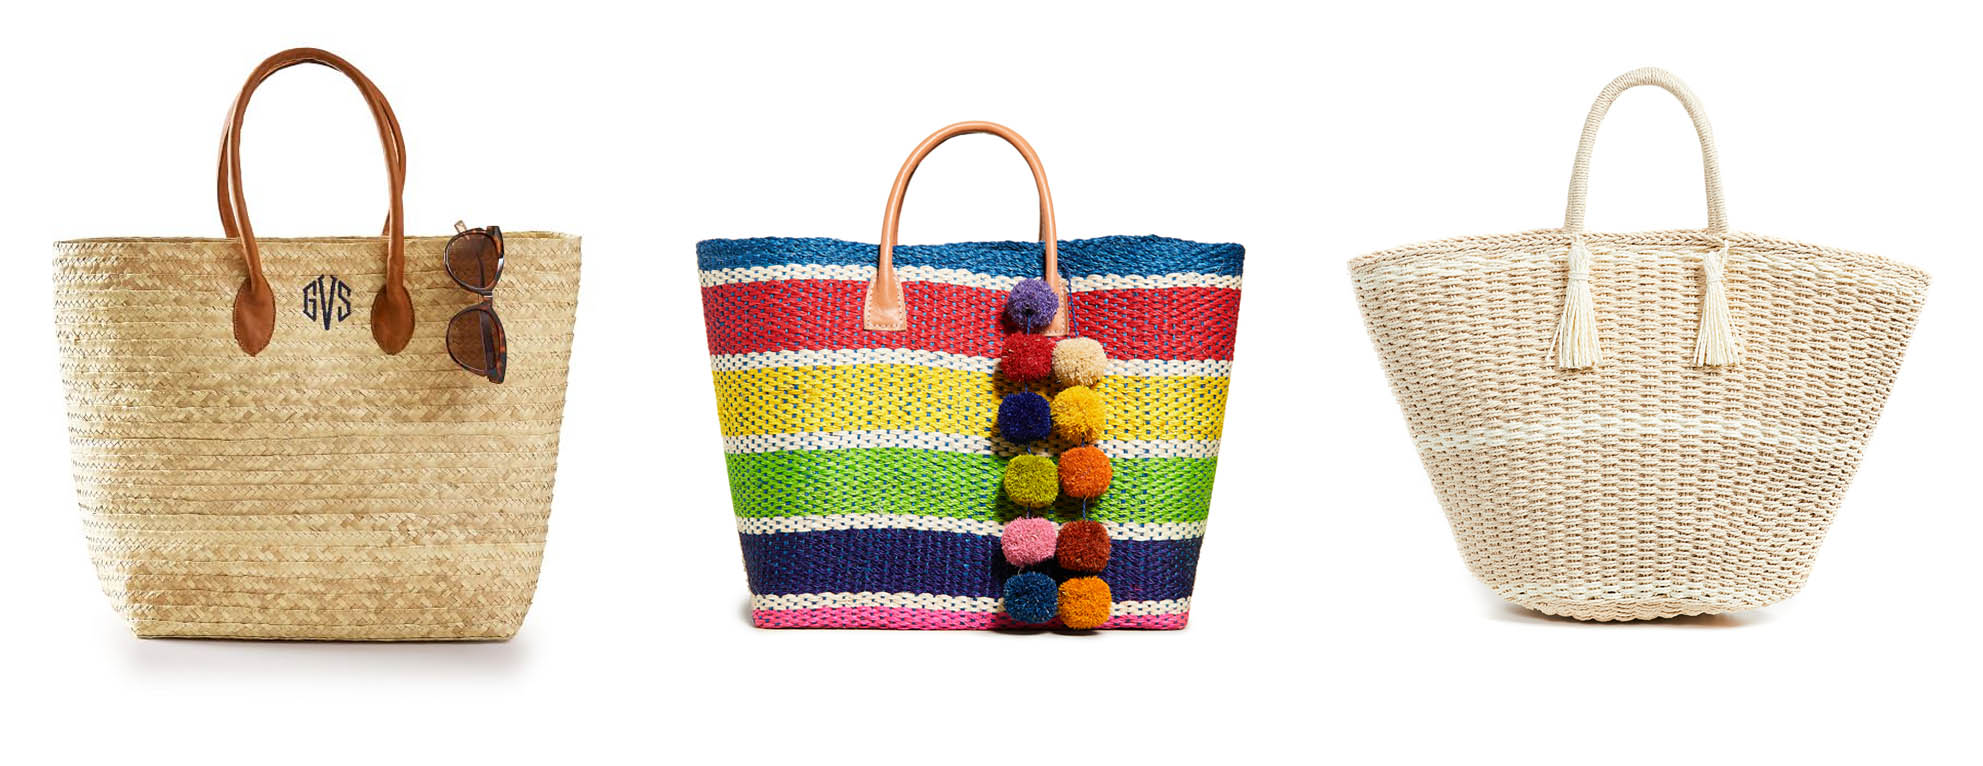 The Best Woven Totes and Basket Bags for Summer - Lolli and Me